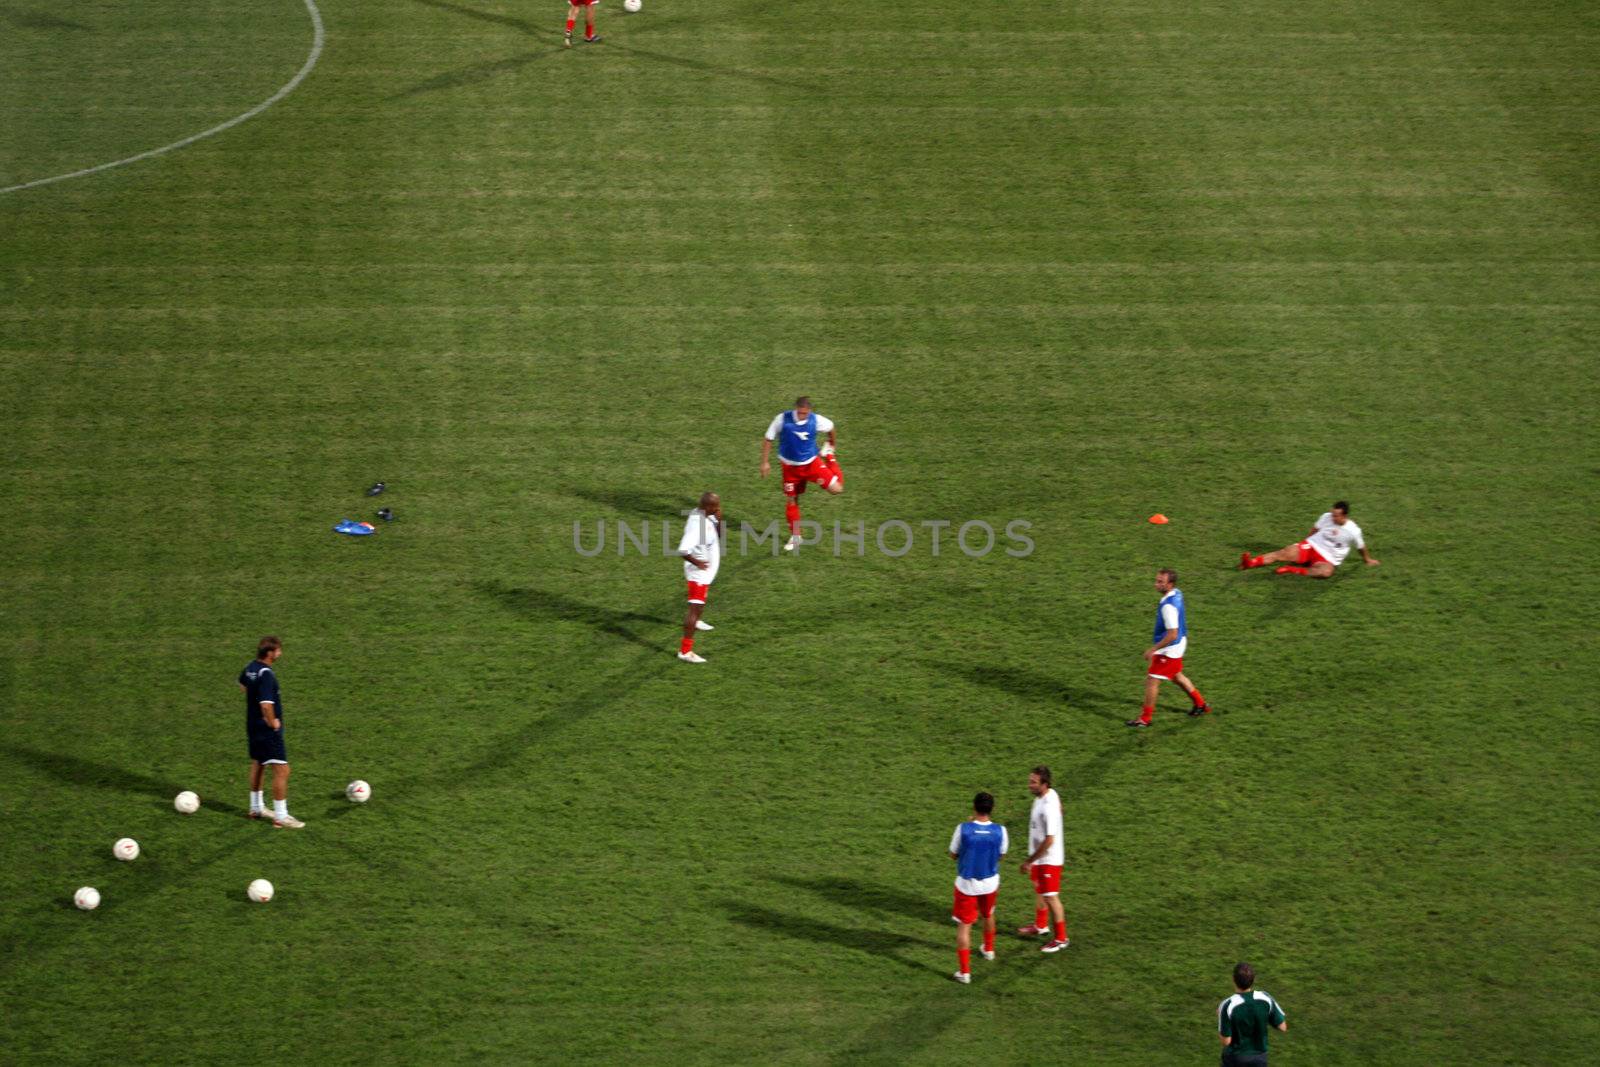 Portugal versus Malta FIFA World Cup Qualifier, South Africa, 2010 warm up before the game